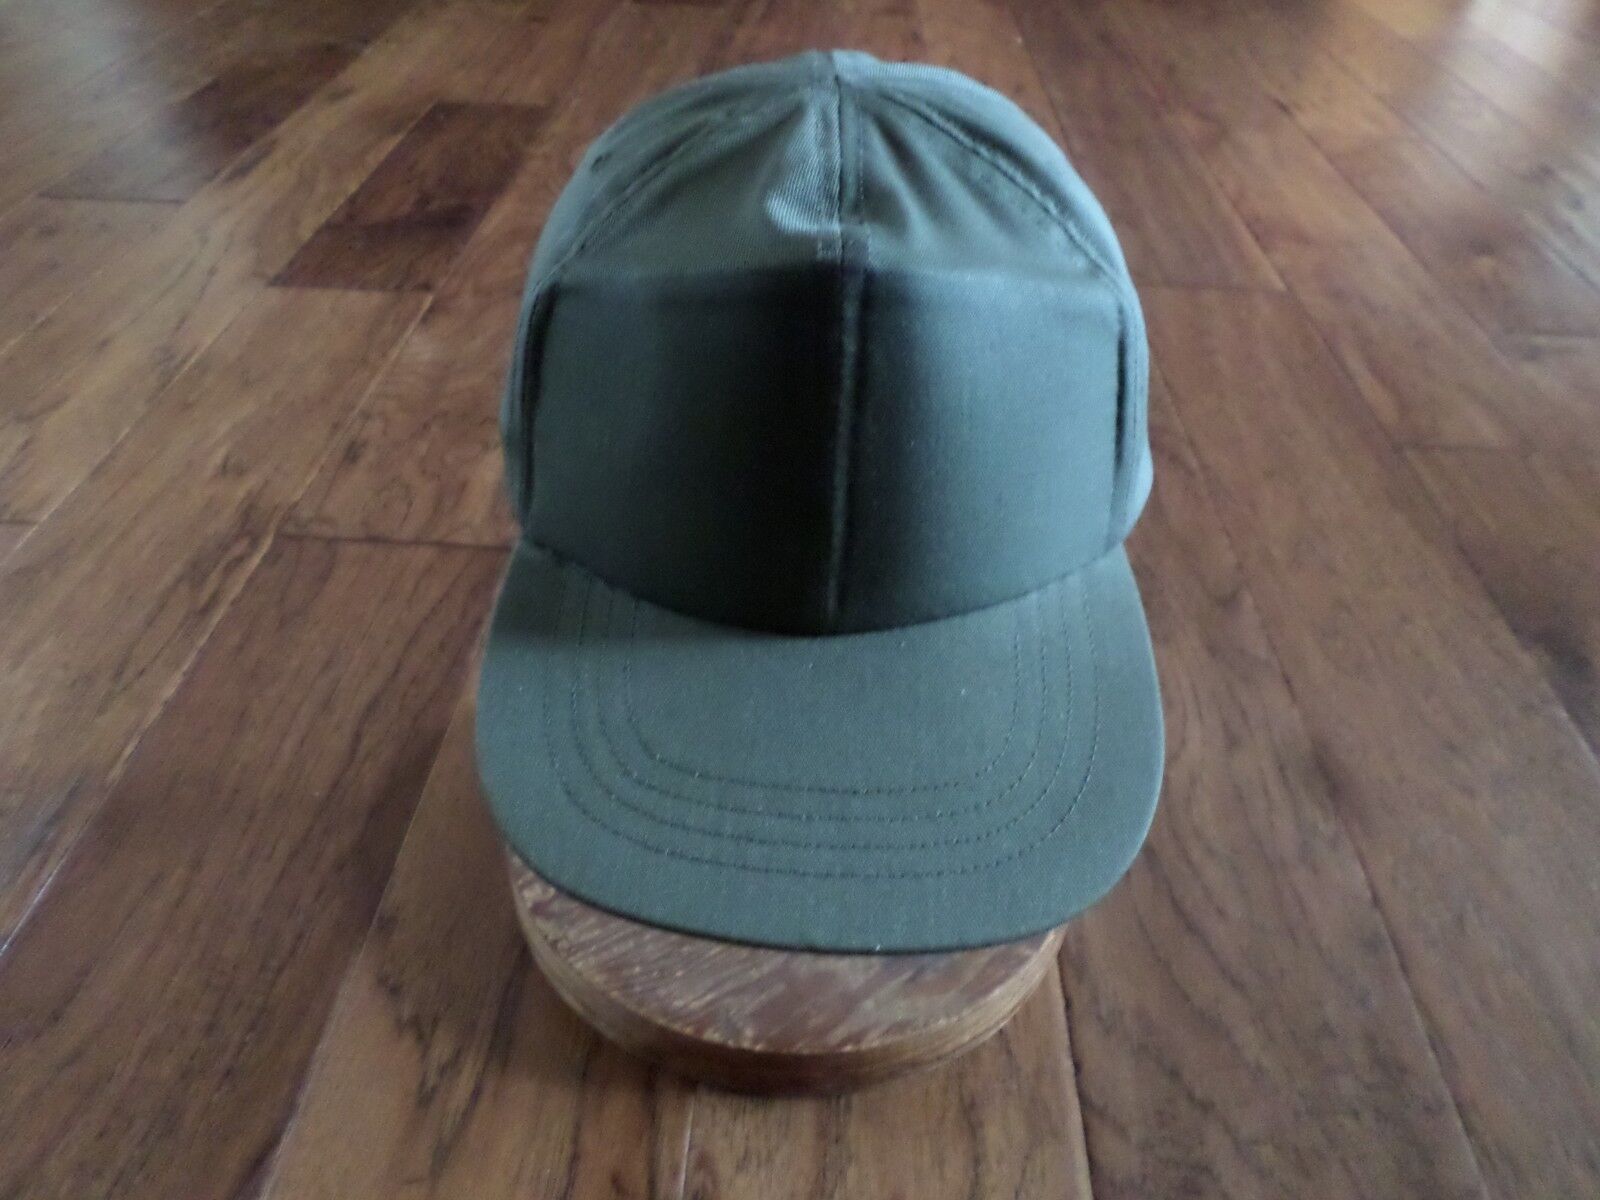  NEW VINTAGE U.S MILITARY ARMY BASEBALL CAP HAT SIZE 7 OD GREEN IN COLOR 